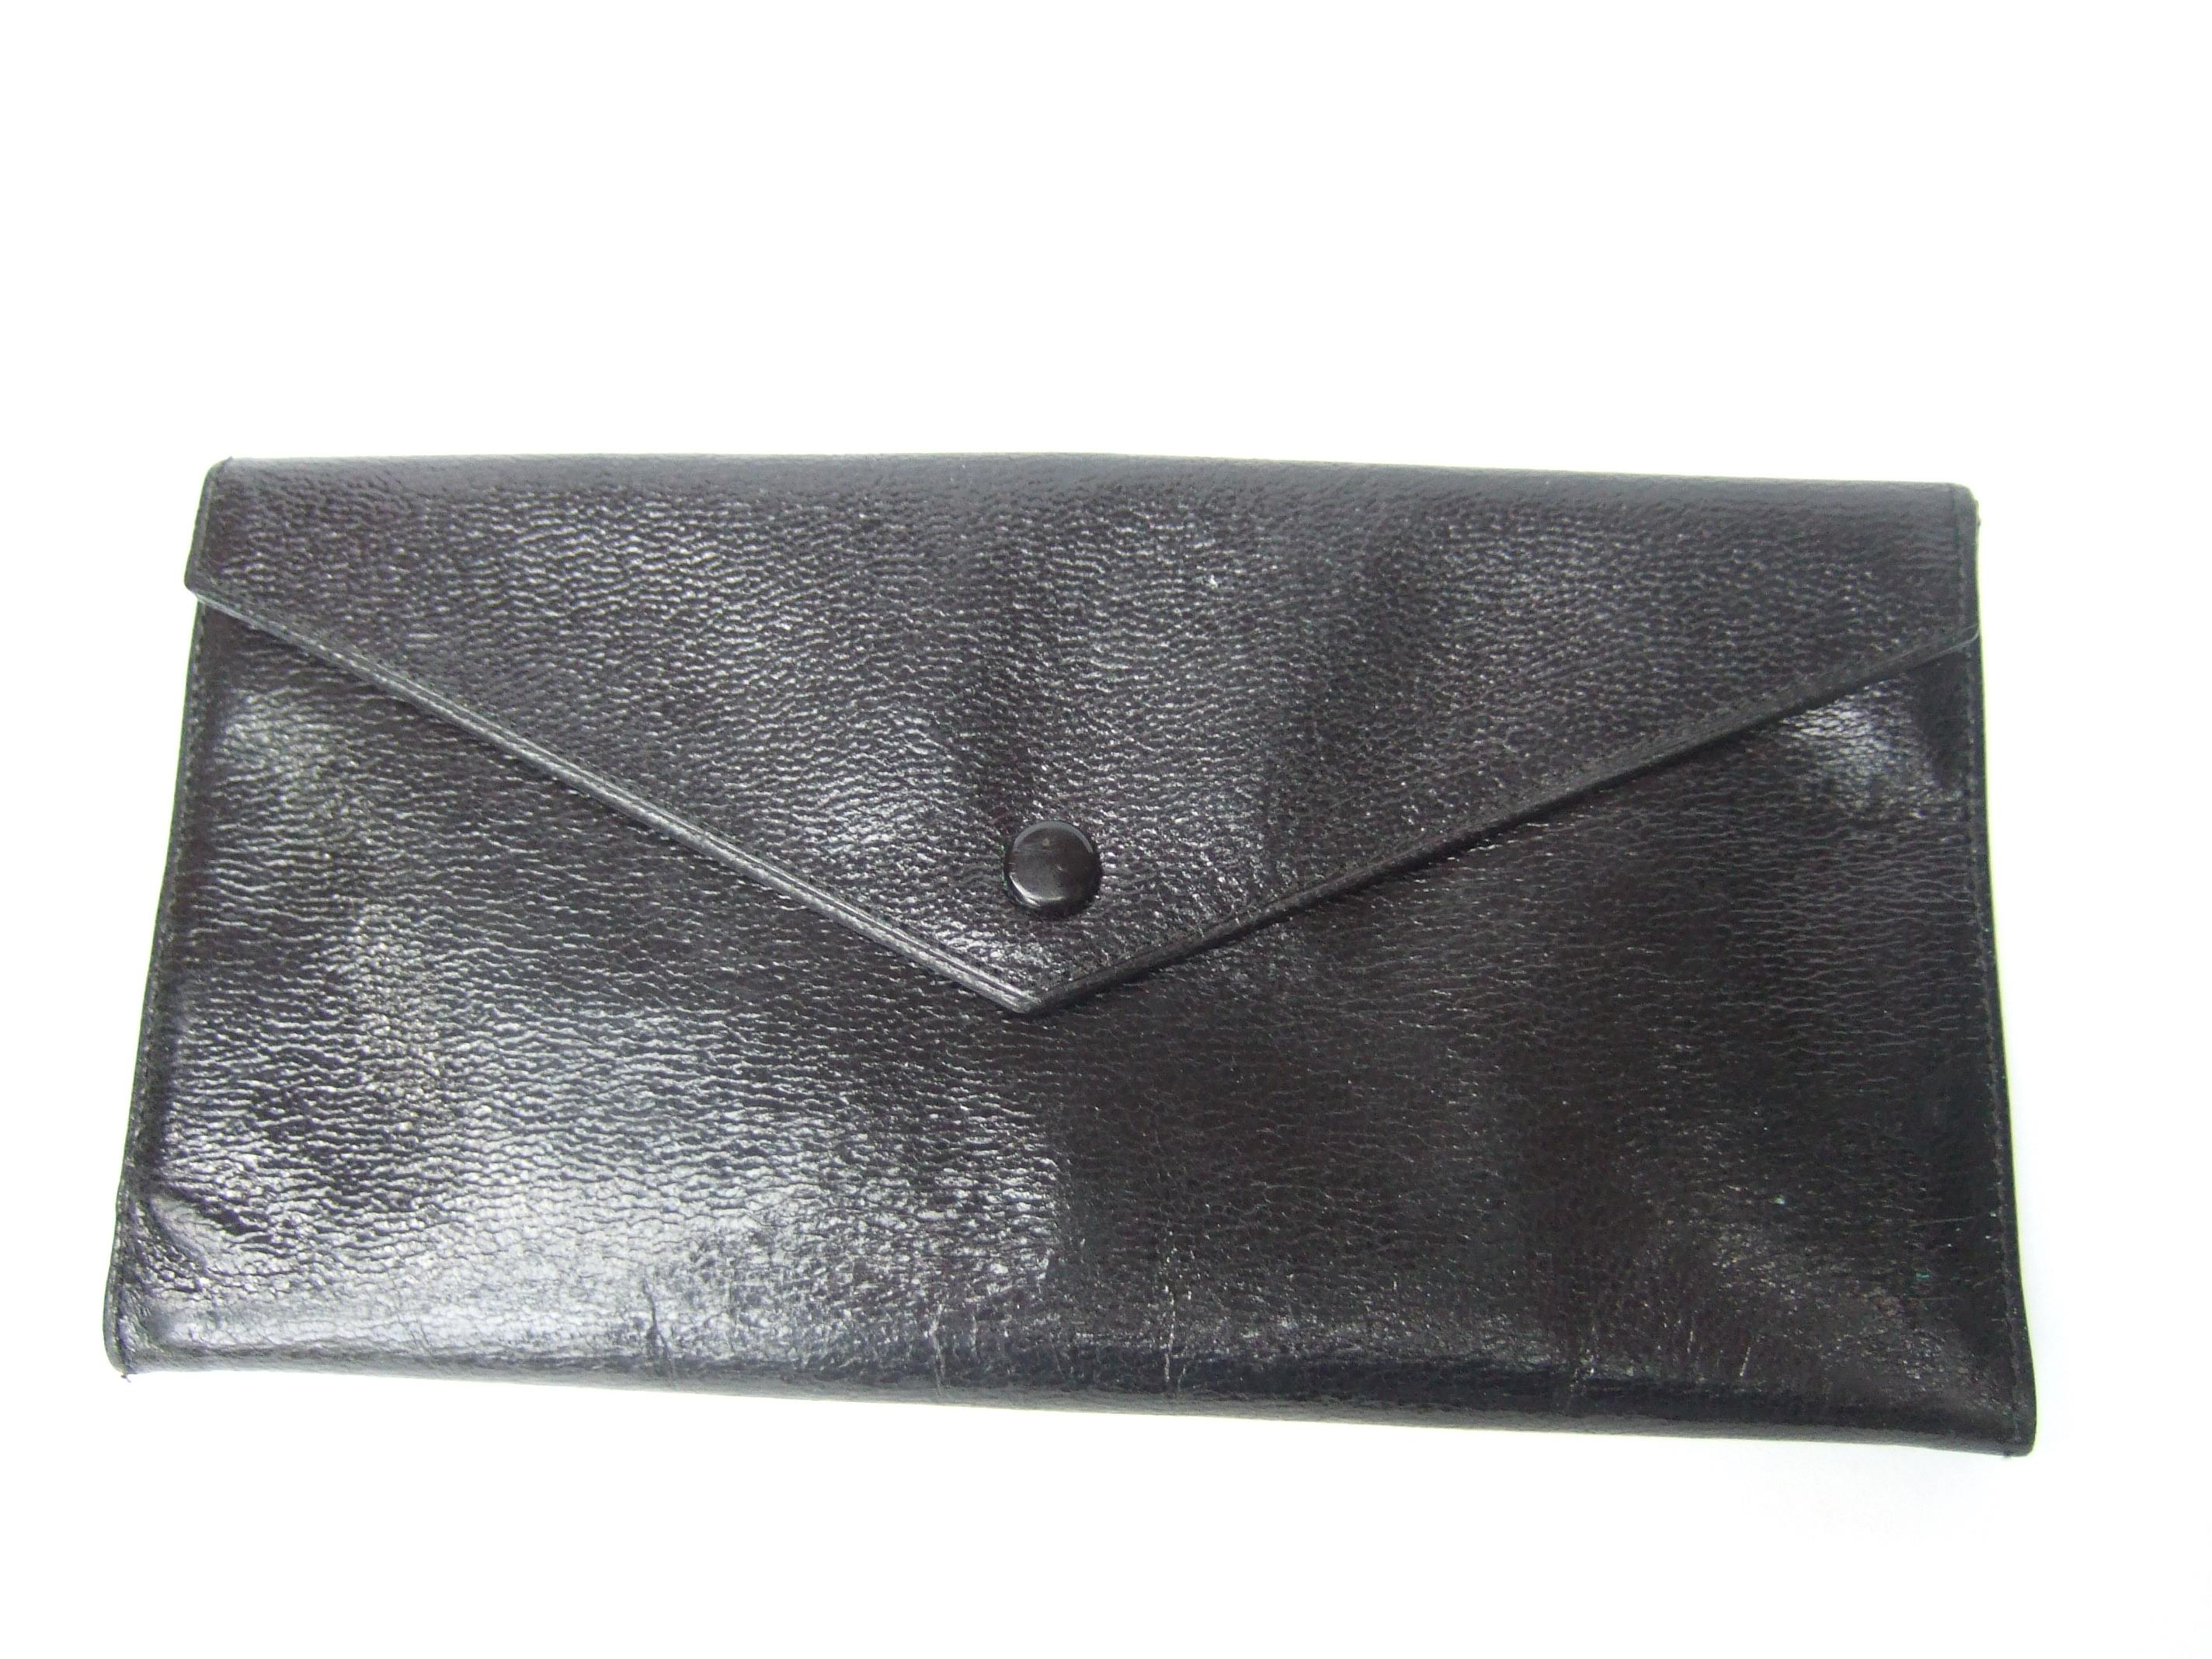 Gucci Italy Rare Black Leather Hand Clasp Wallet c 1970s 5